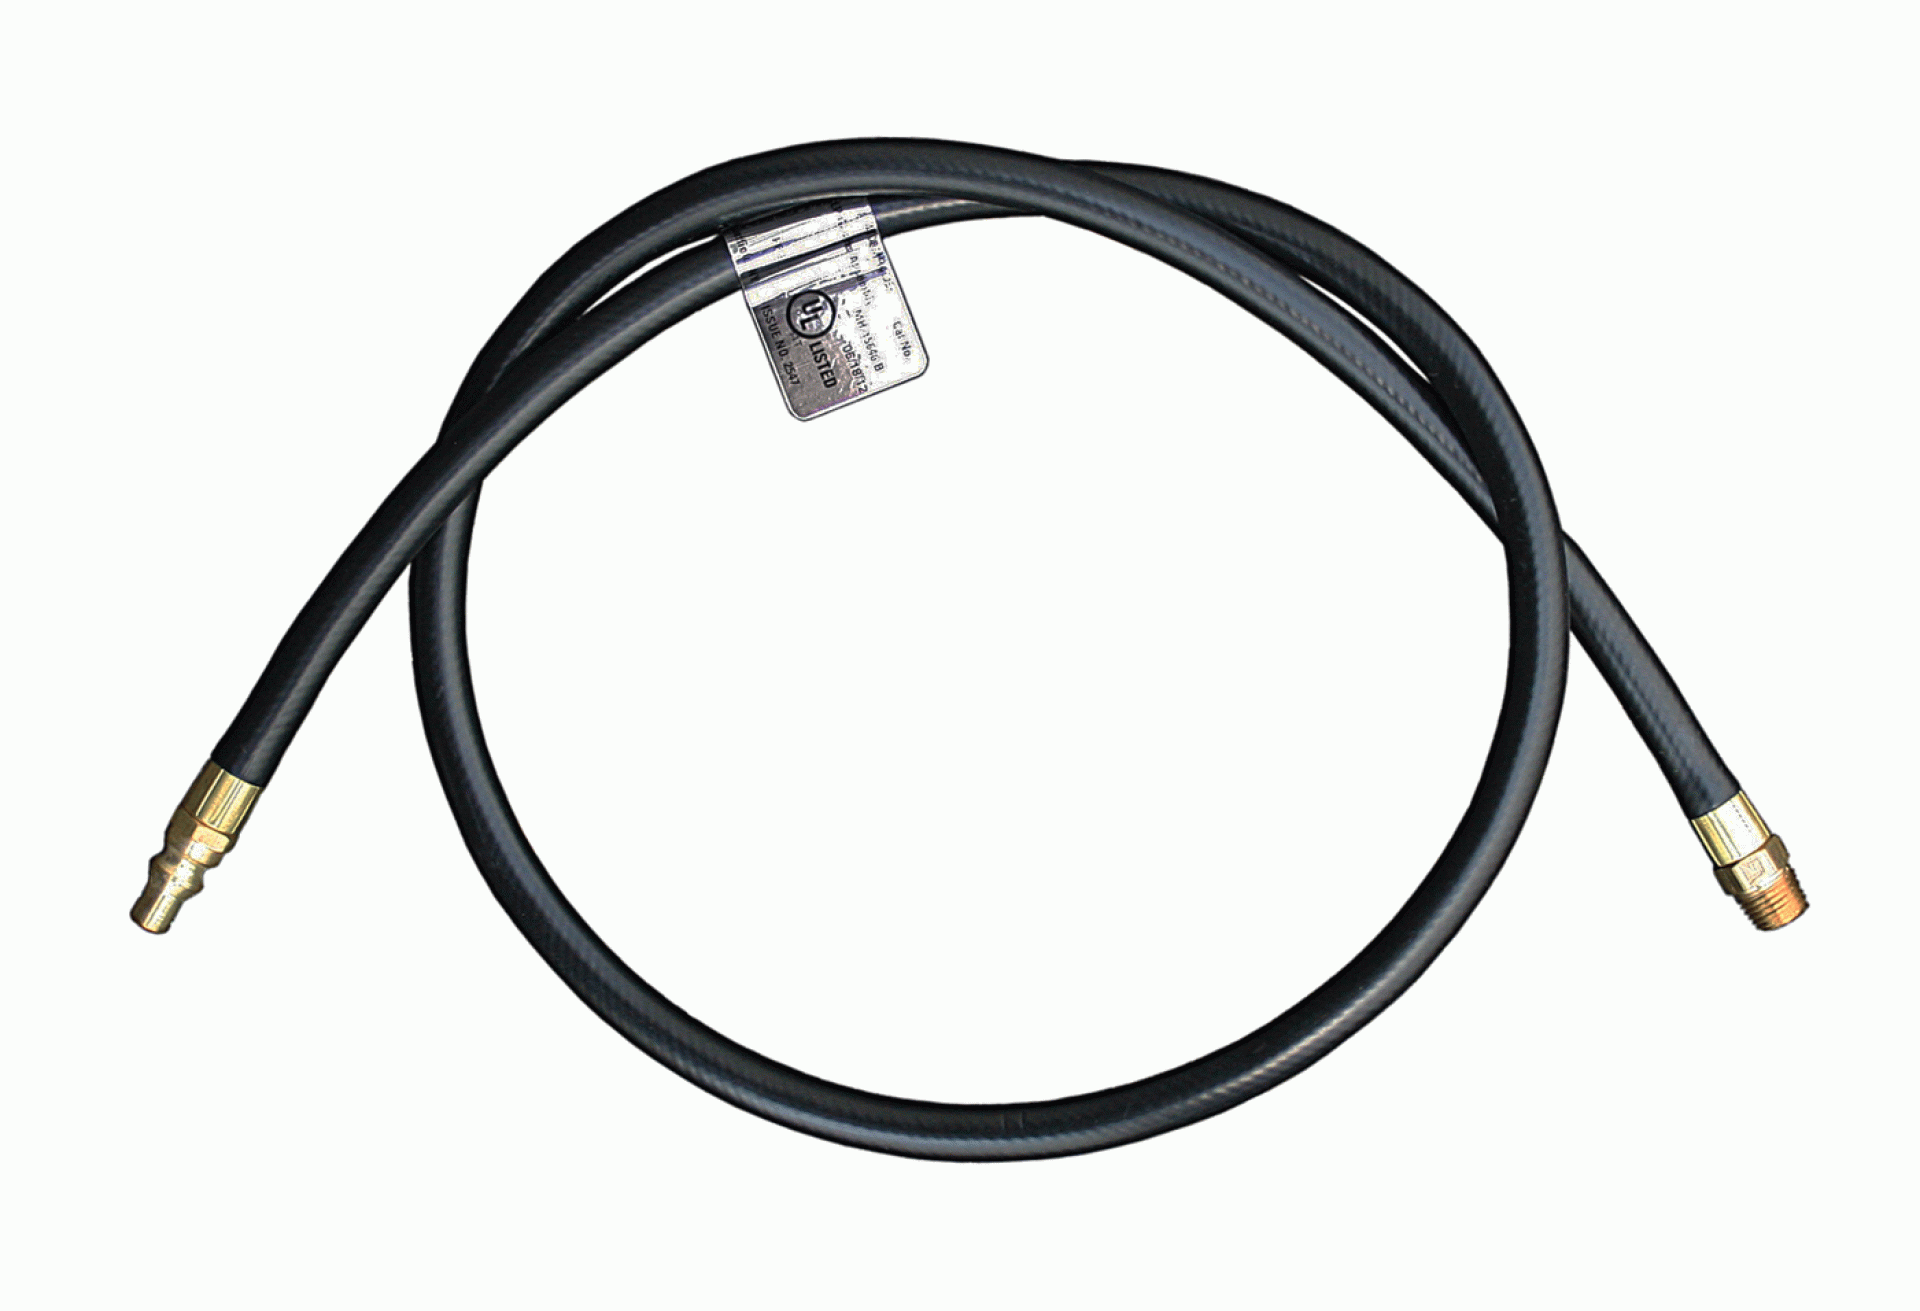 MARSHALL EXCELSIOR COMPANY | MER14TCMPQD-48 | HIGH PRESSURE HOSE 1/4" ID 48" 1/4" MNPT X MALE QUICK DISCONNECT NIPPLE